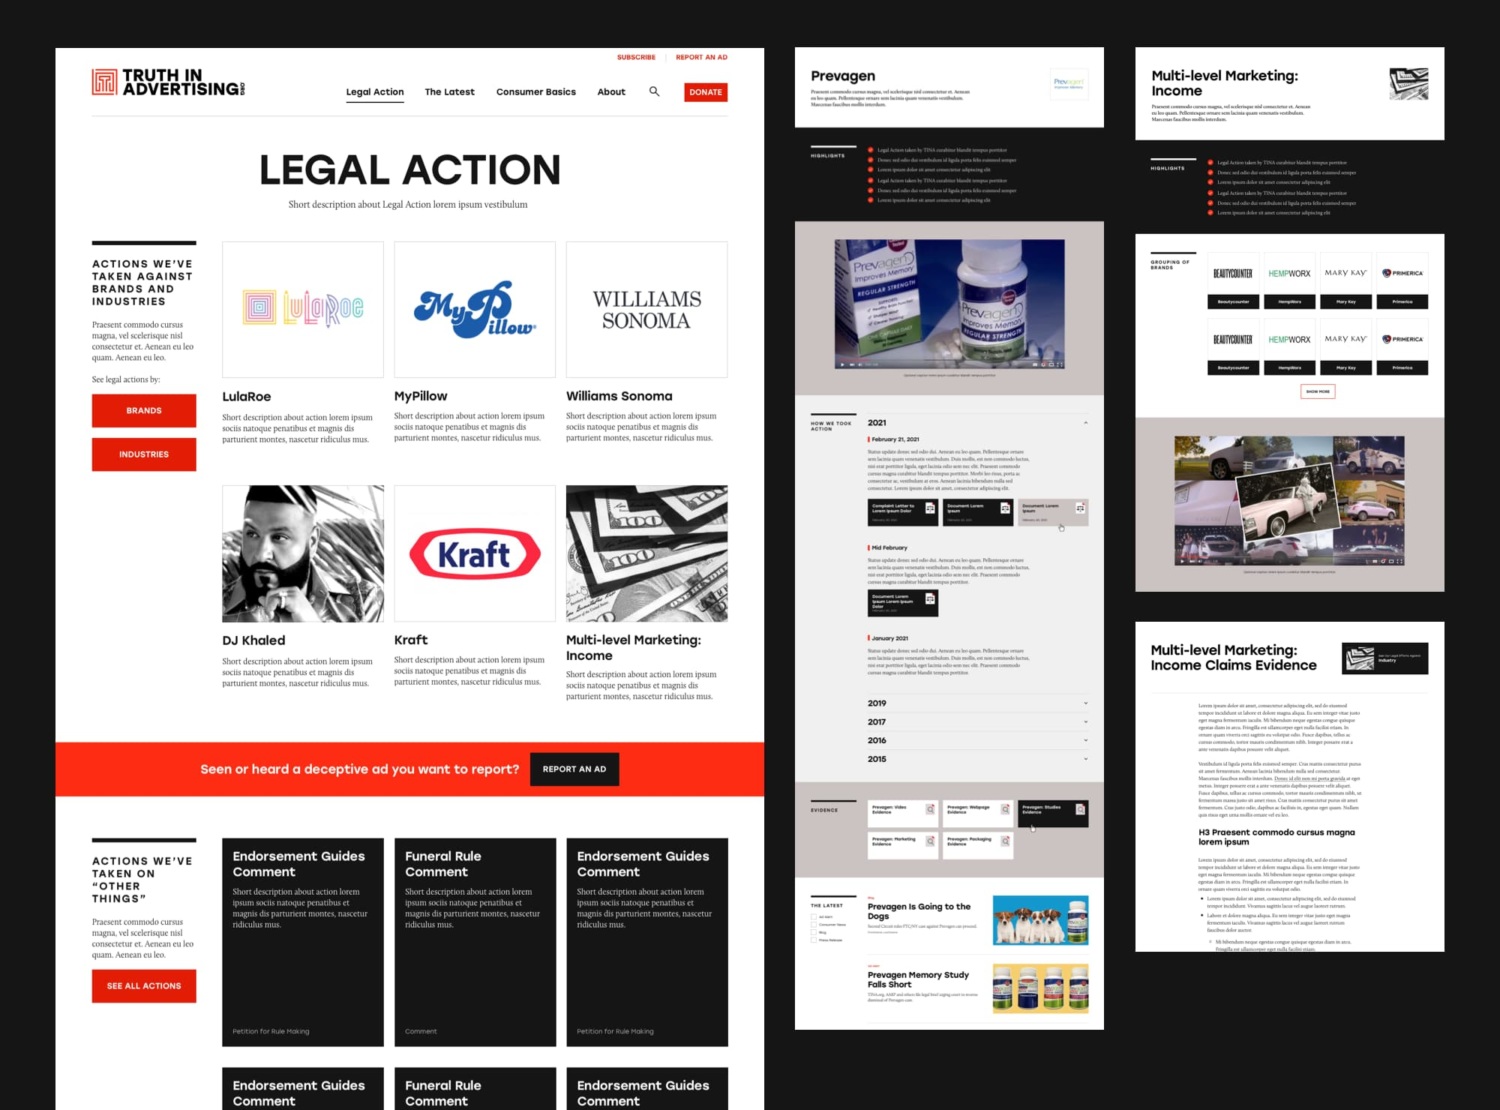 Collage of page designs that showcase the legal work they do against brands and industries